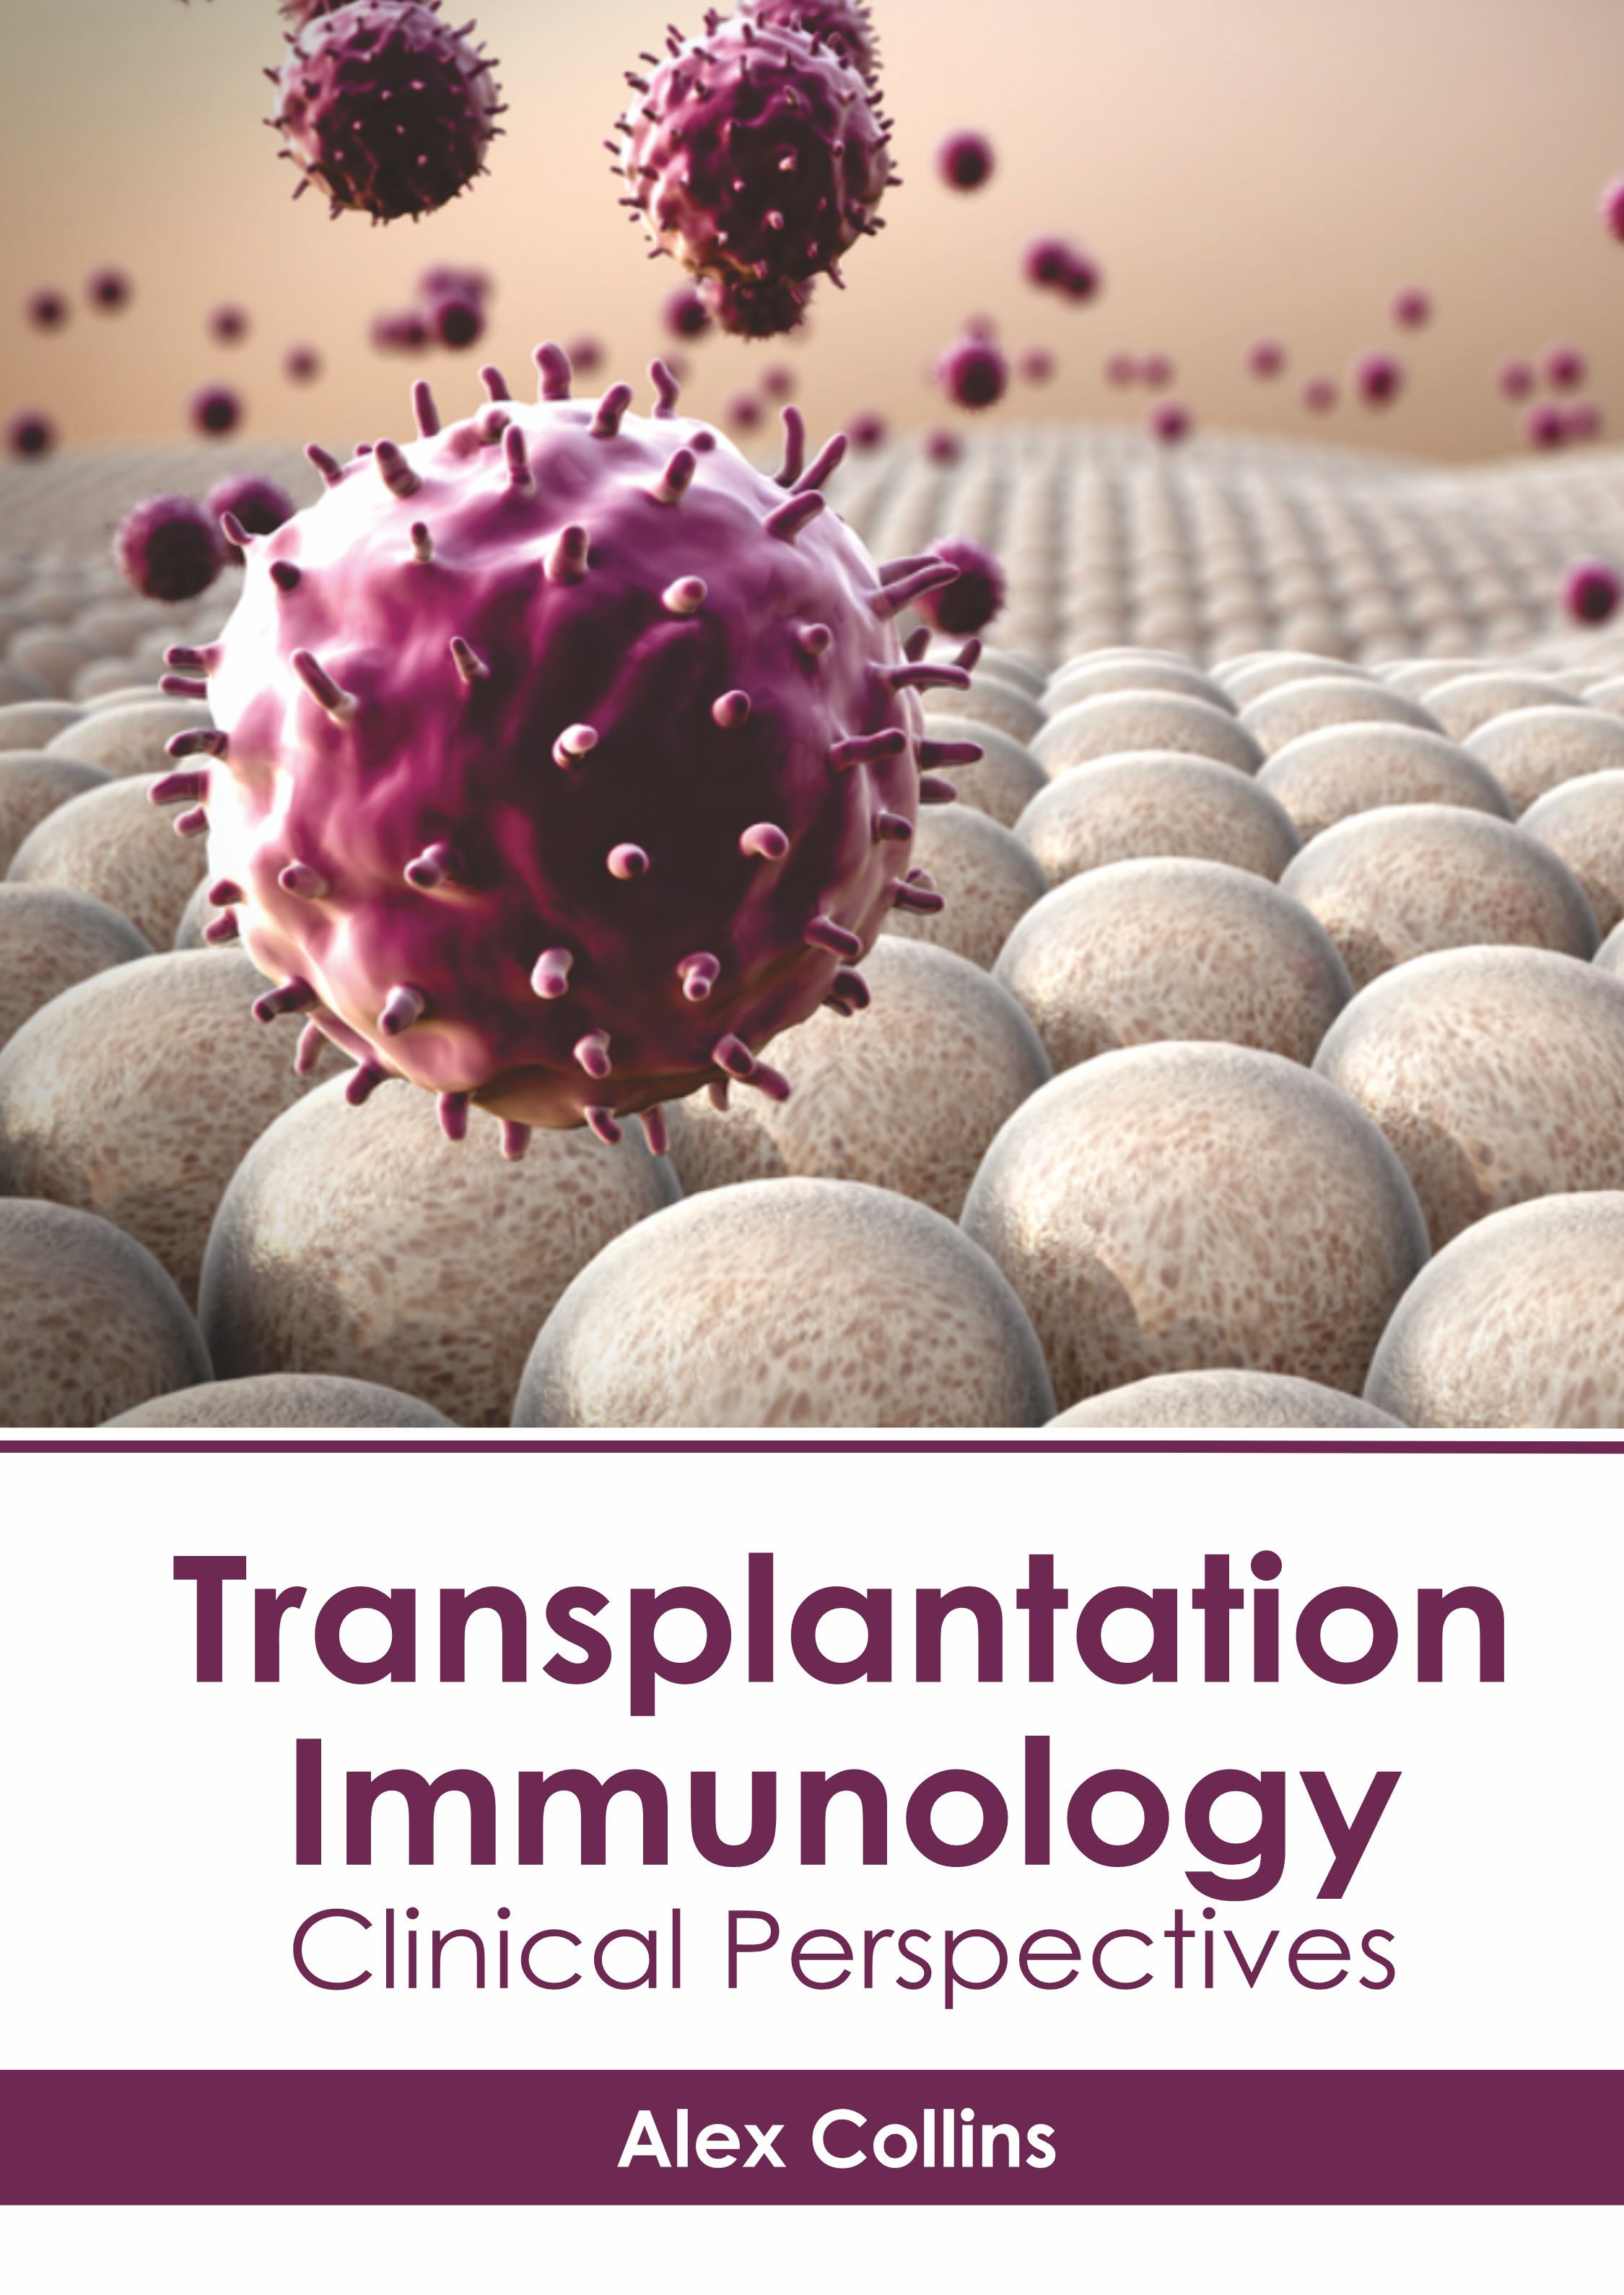 TRANSPLANTATION IMMUNOLOGY: CLINICAL PERSPECTIVES- ISBN: 9781639275021